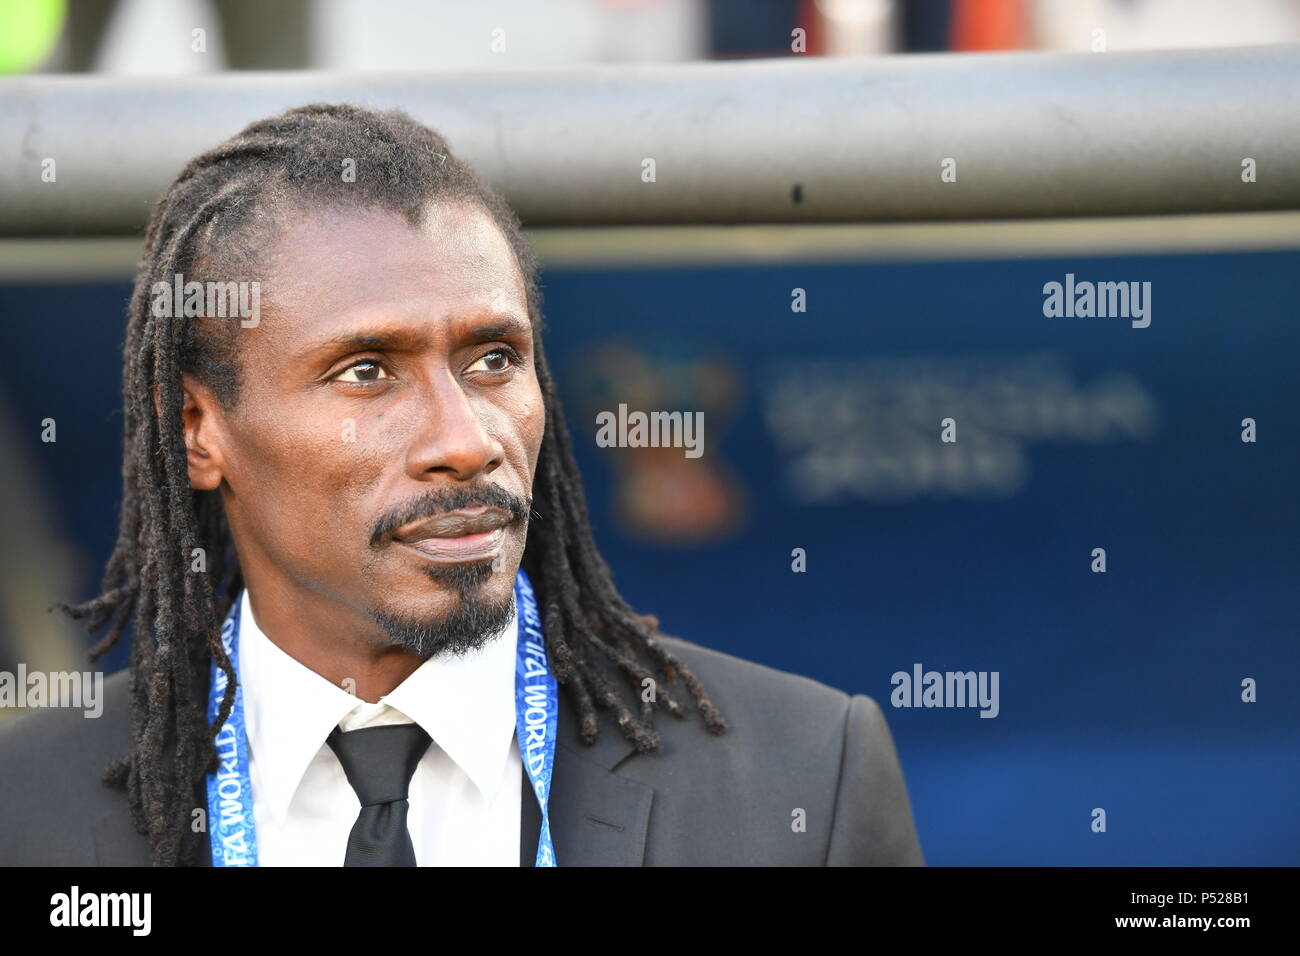 Yekaterinburg, Russia. 24th June, 2018. Senegal's head coach Aliou Cisse is seen before the 2018 FIFA World Cup Group H match between Japan and Senegal in Yekaterinburg, Russia, June 24, 2018. Credit: Liu Dawei/Xinhua/Alamy Live News Stock Photo